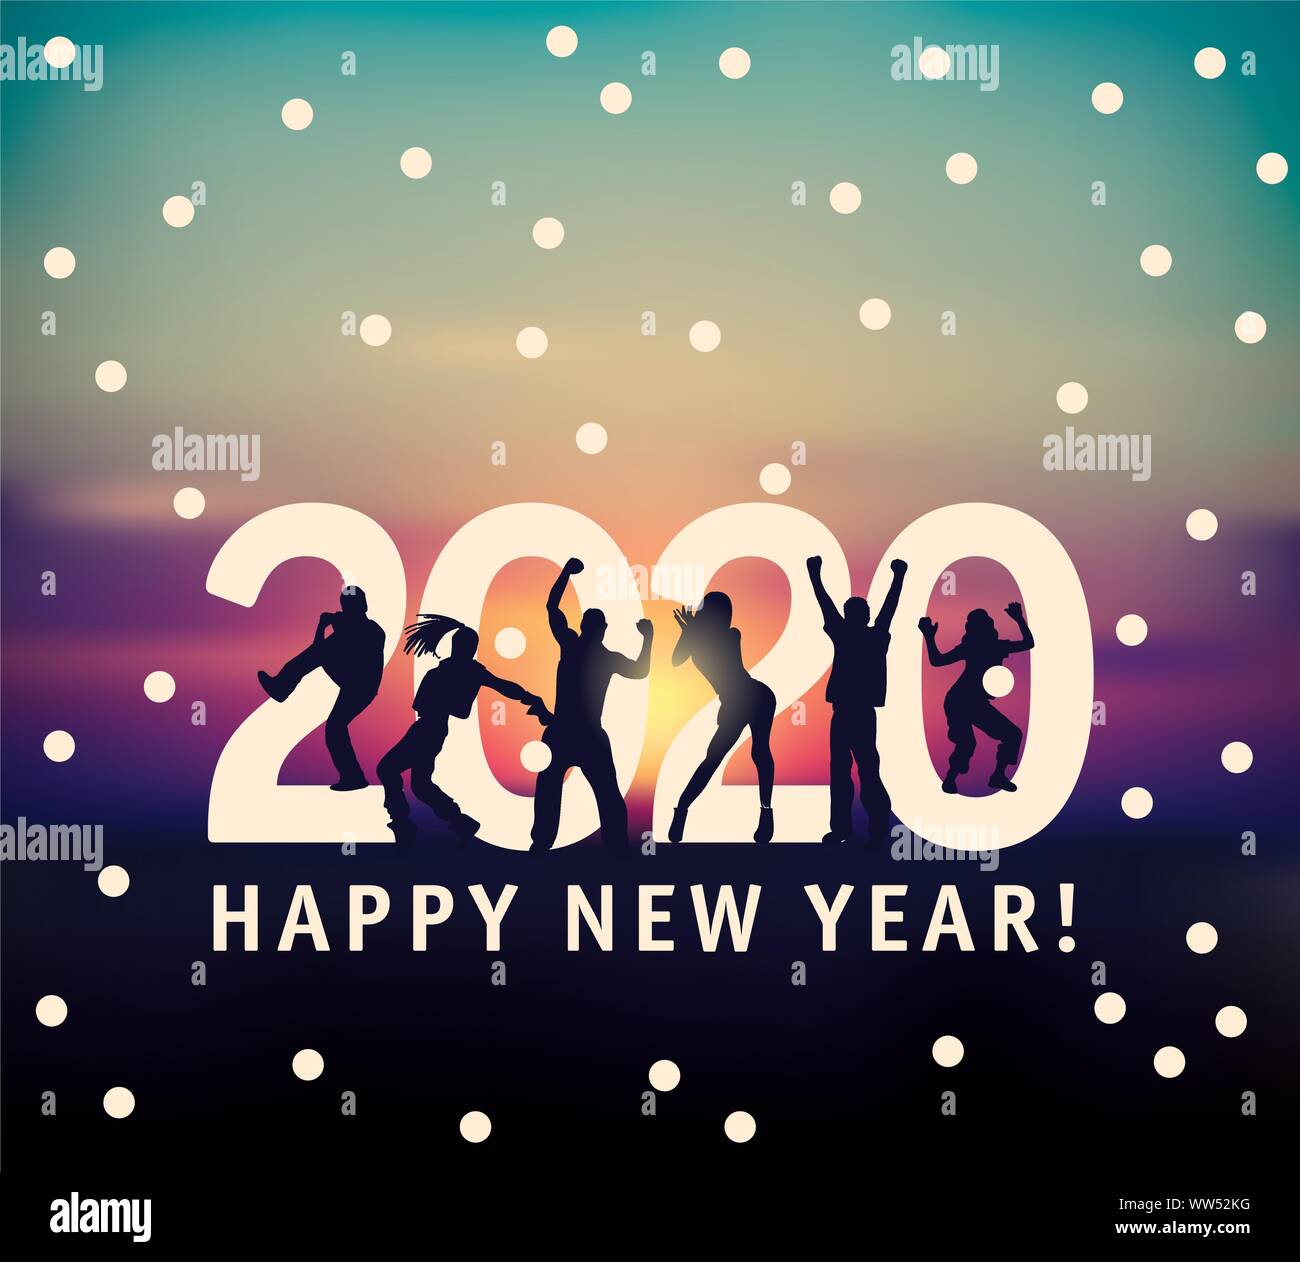 New year card 2020 symbol young group happy people silhouette sky and snow. Color vector illustration EPS8 Stock Vector